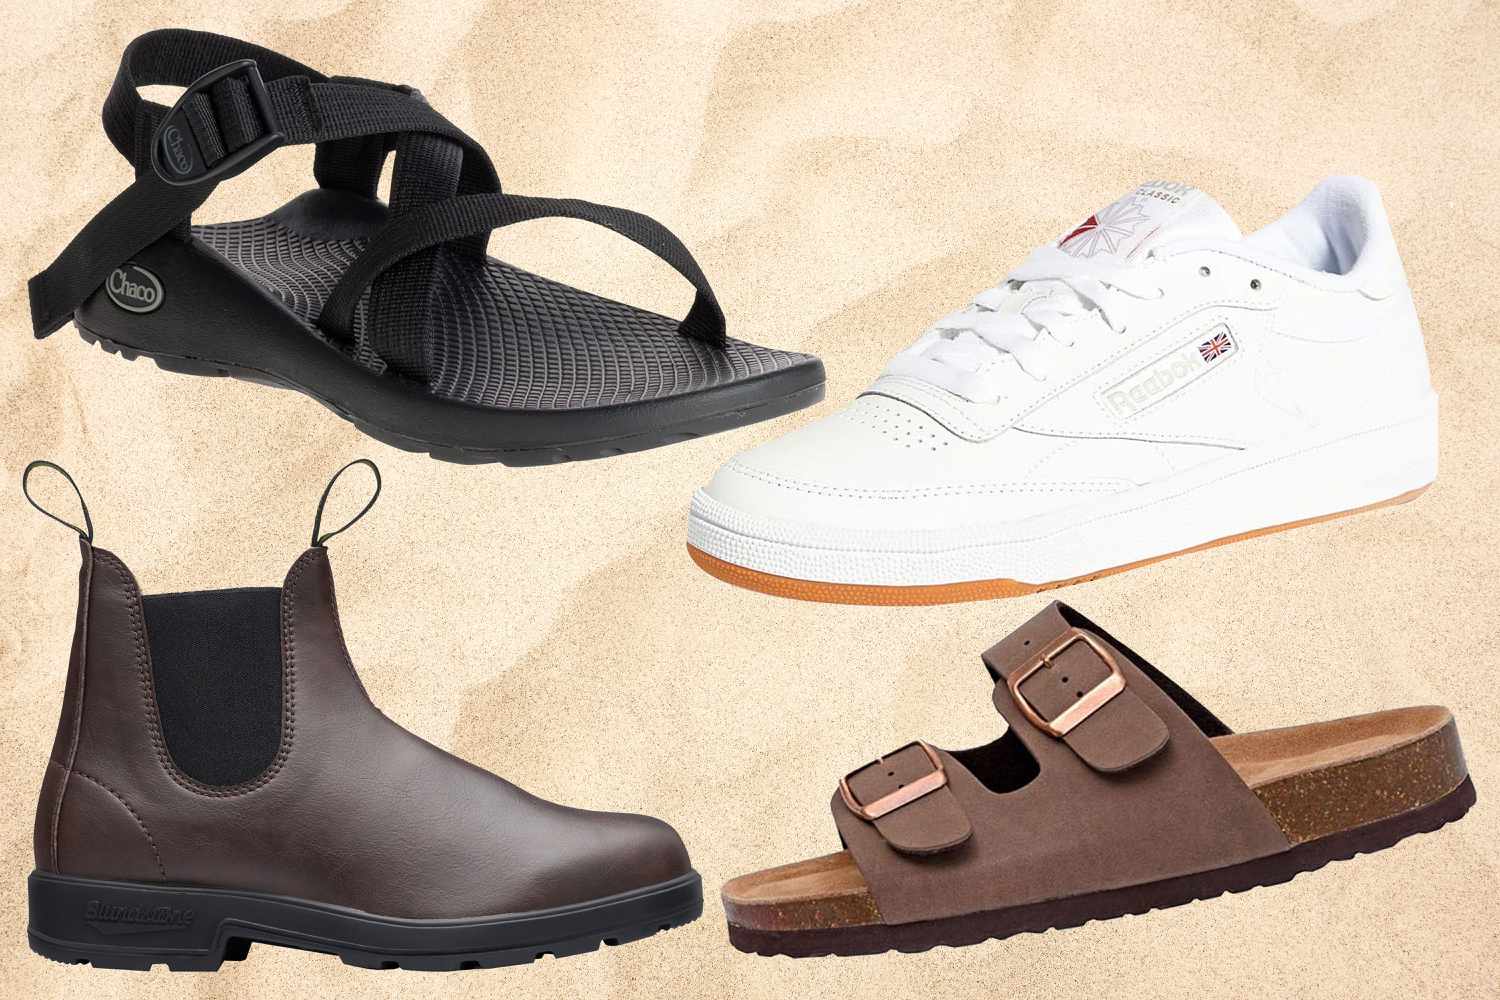 I’m a Comfy Shoe Snob, and These Are the 8 Travel Styles I Rotate Through My Suitcase — From $30